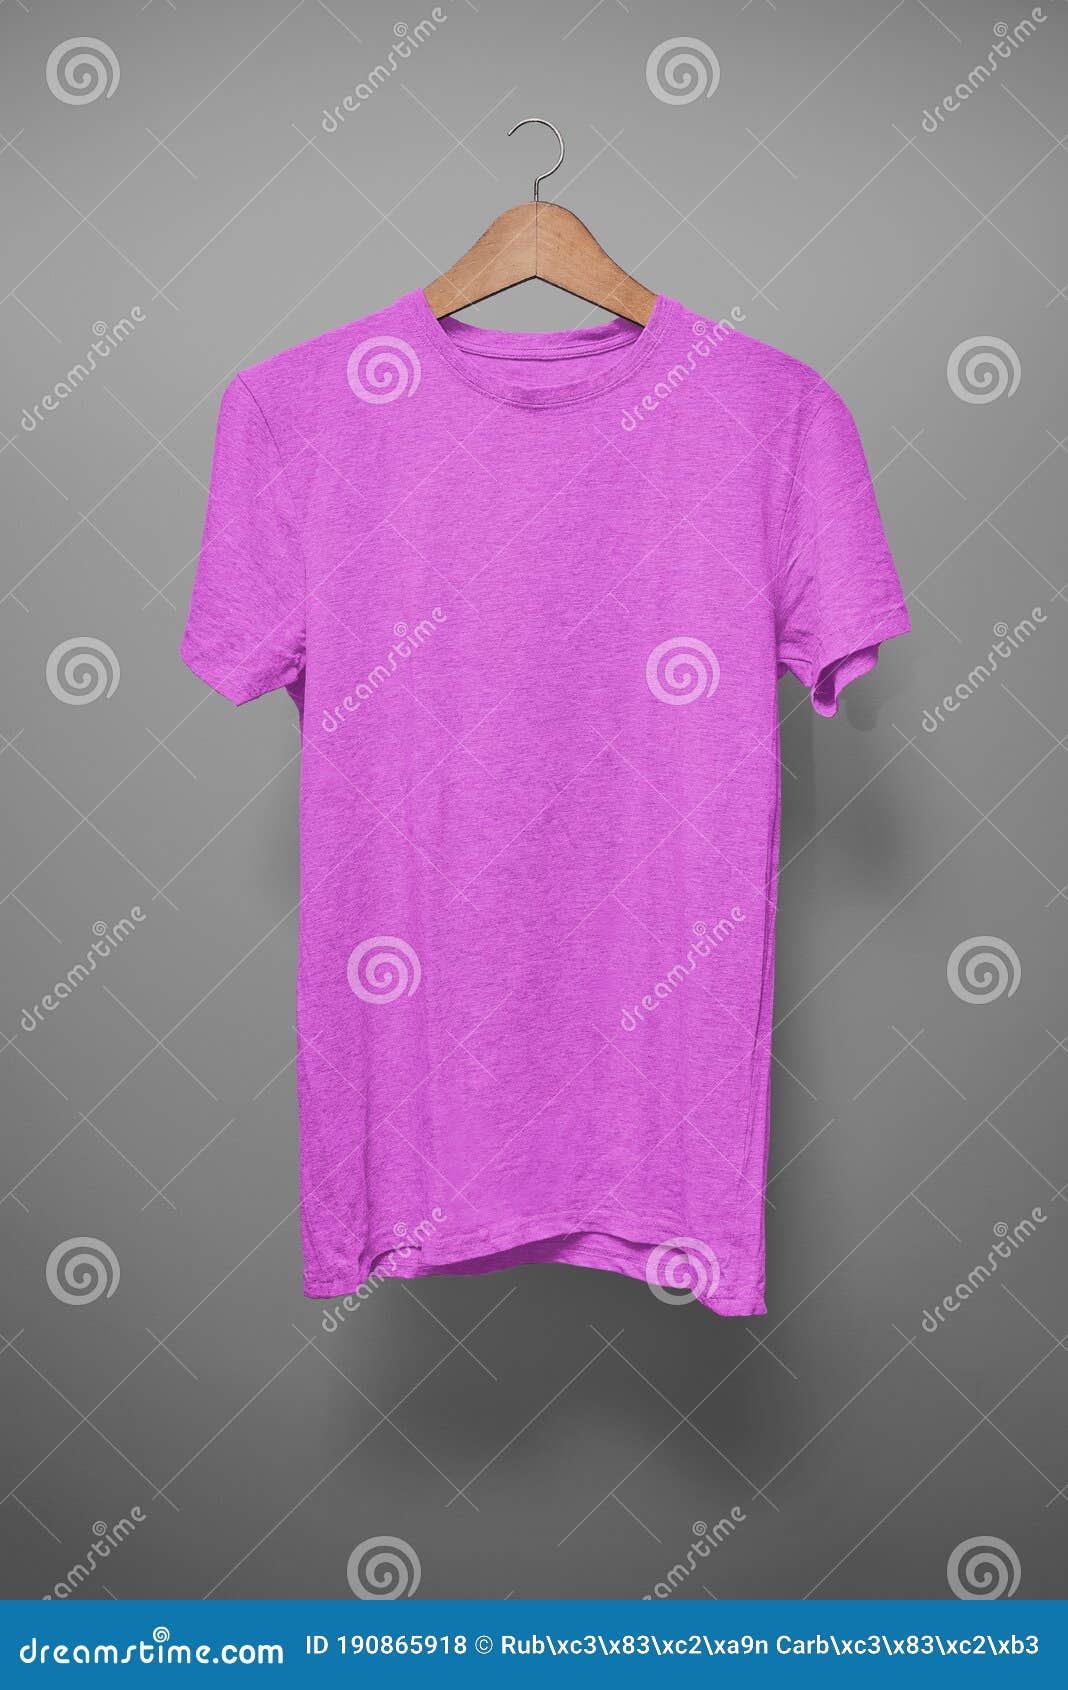 Purple T-Shirt on a Hanger Against a Grey Background Stock Photo ...